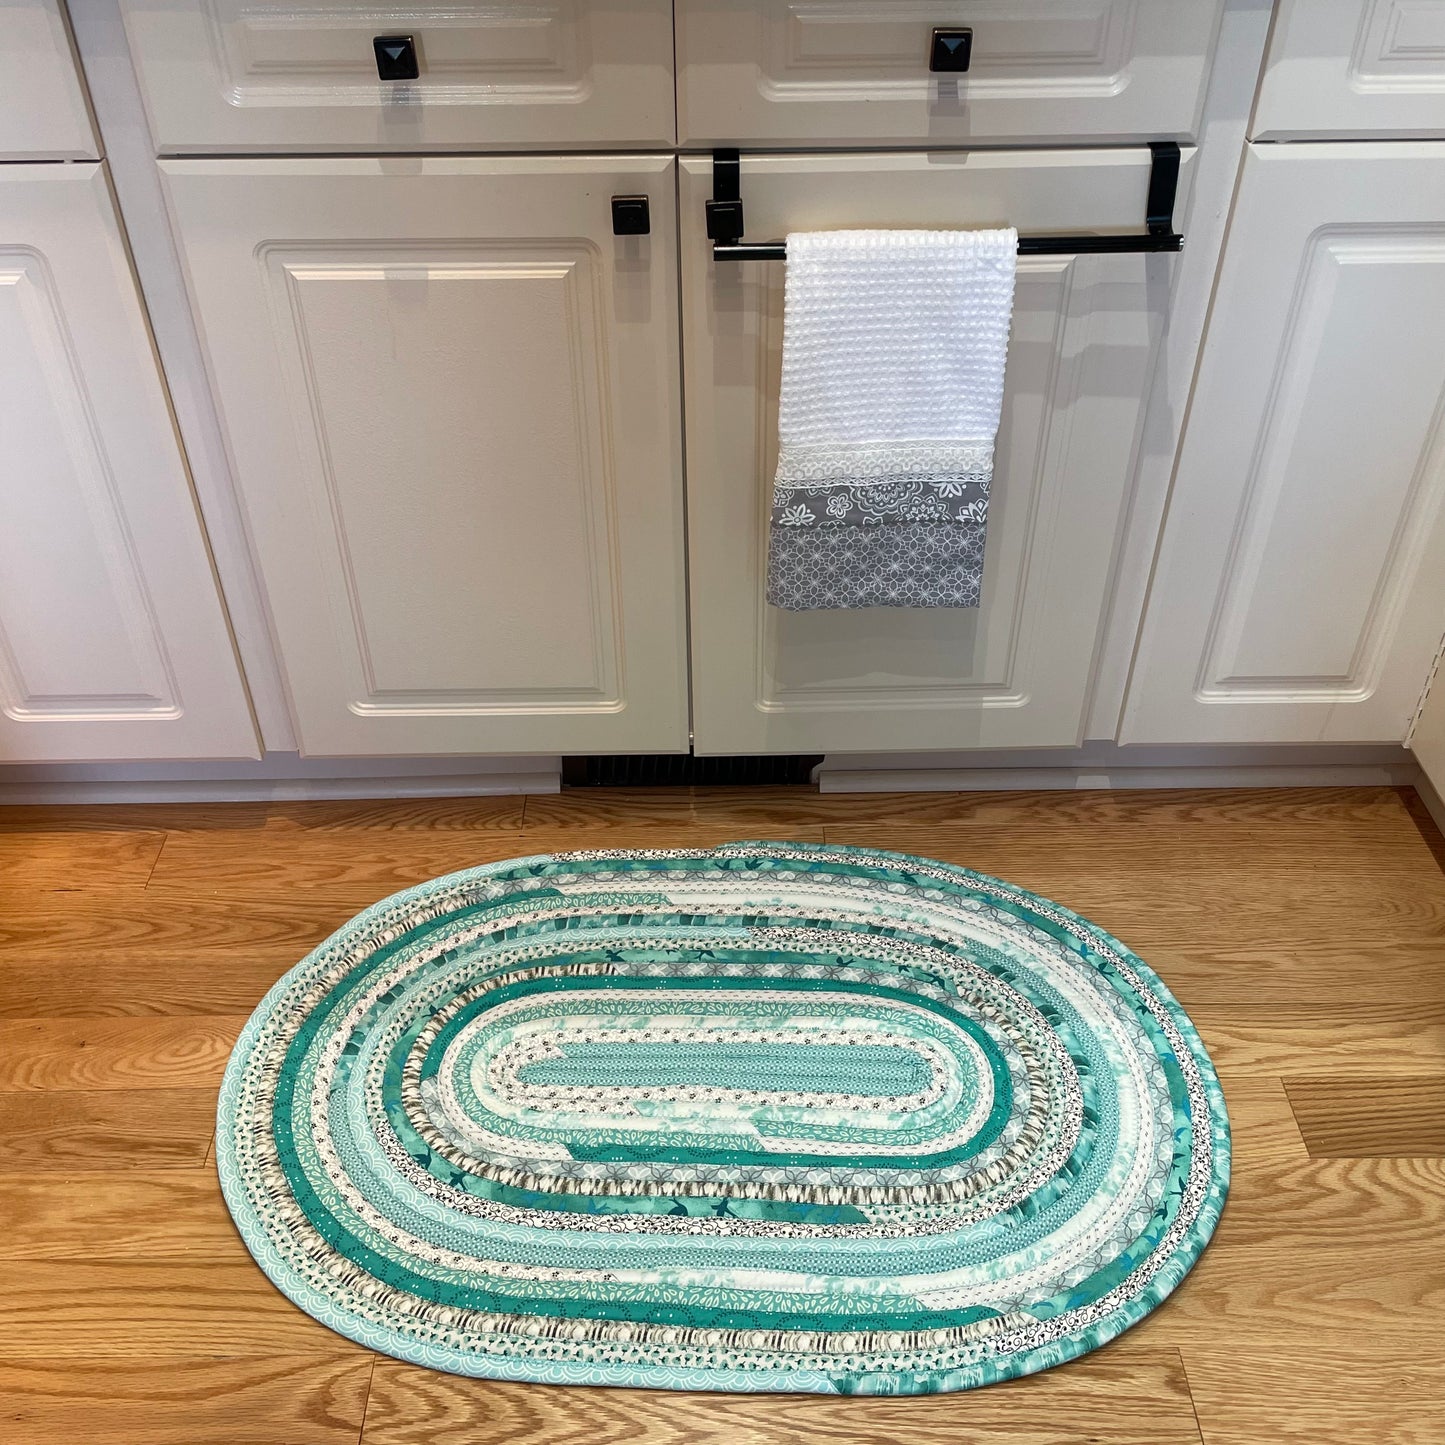 Teal and Black Kitchen Accent Rug, Washable Kitchen Mat or Luxury Bathmat - Home Stitchery Decor